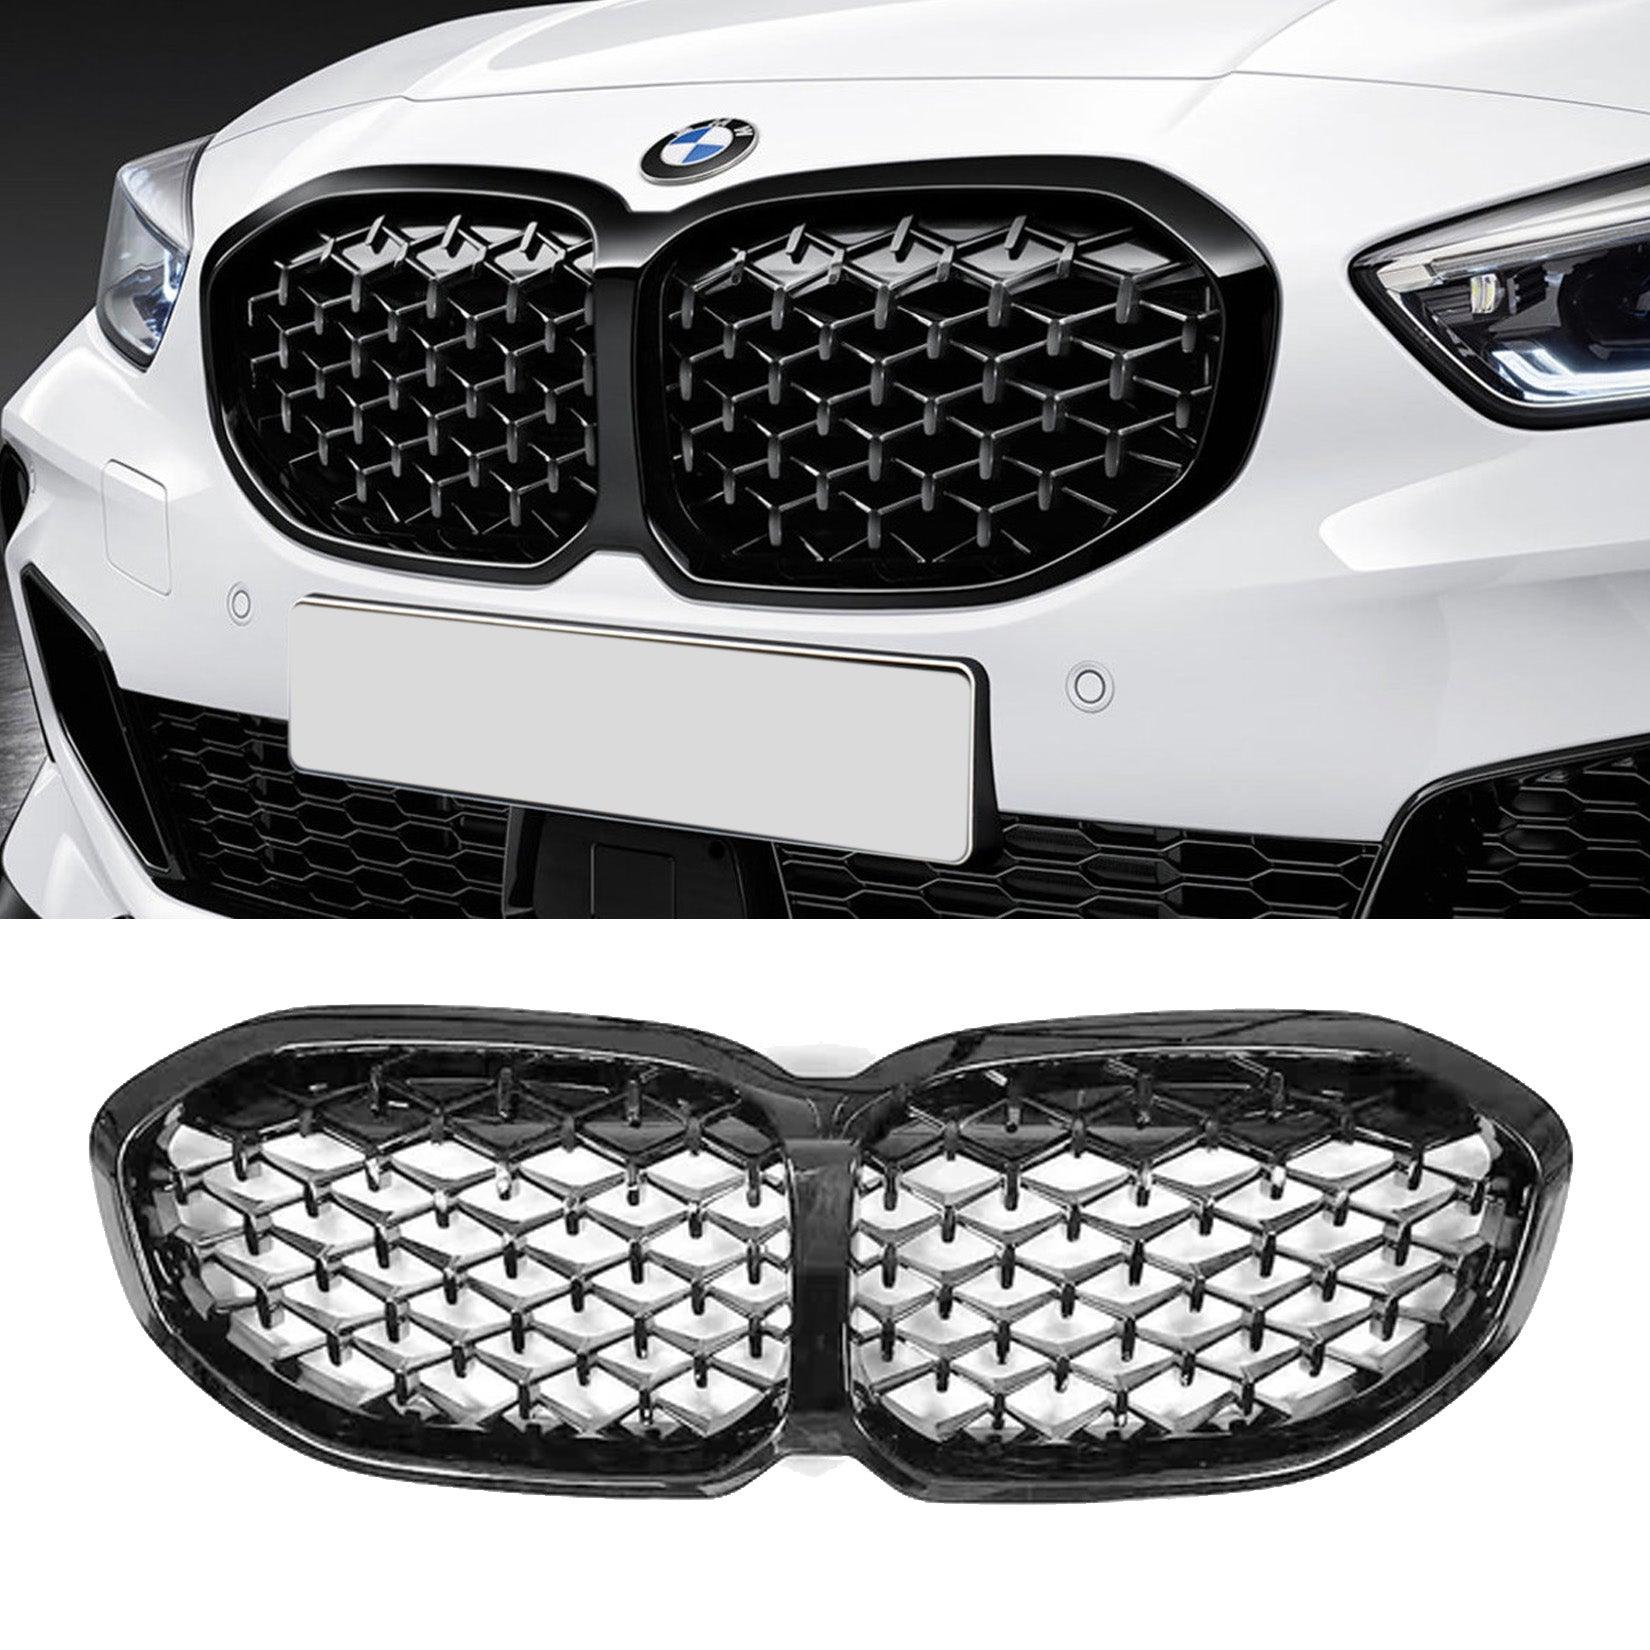 BMW 1 SERIES F40 2019 FRONT GRILL DIAMOND STYLE - GLOSS BLACK - RisperStyling